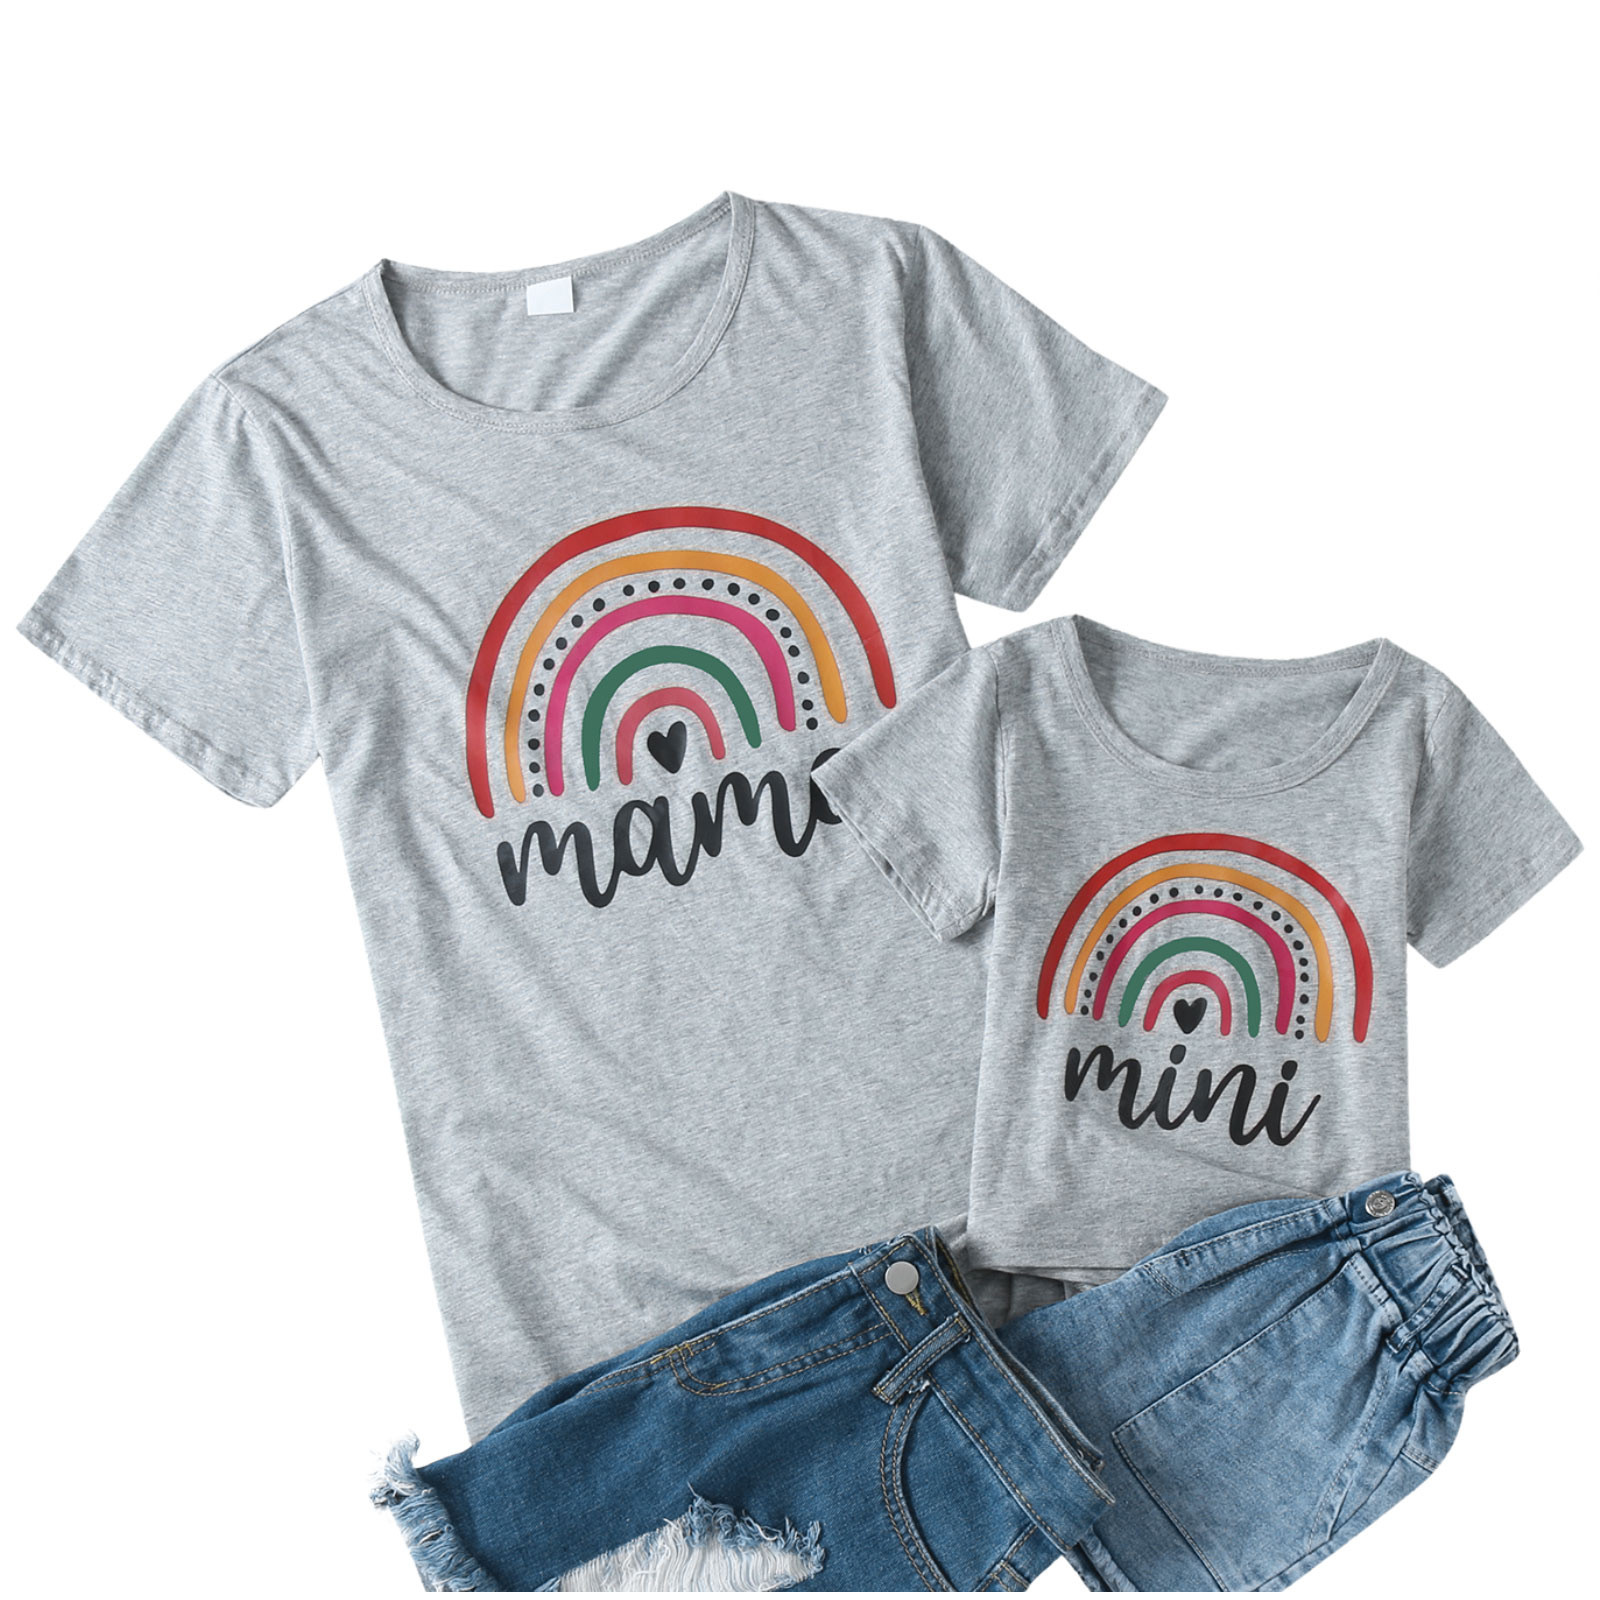 TAIAOJING Mommy and Me Outfits T Short Tops And Blouse Casual Kids Me Summer Clothes Shirt Outfits Sleeve Family Baby Mommy For Toddler Rainbow Tee Girls Girls Tops 2-3 Years - image 1 of 9